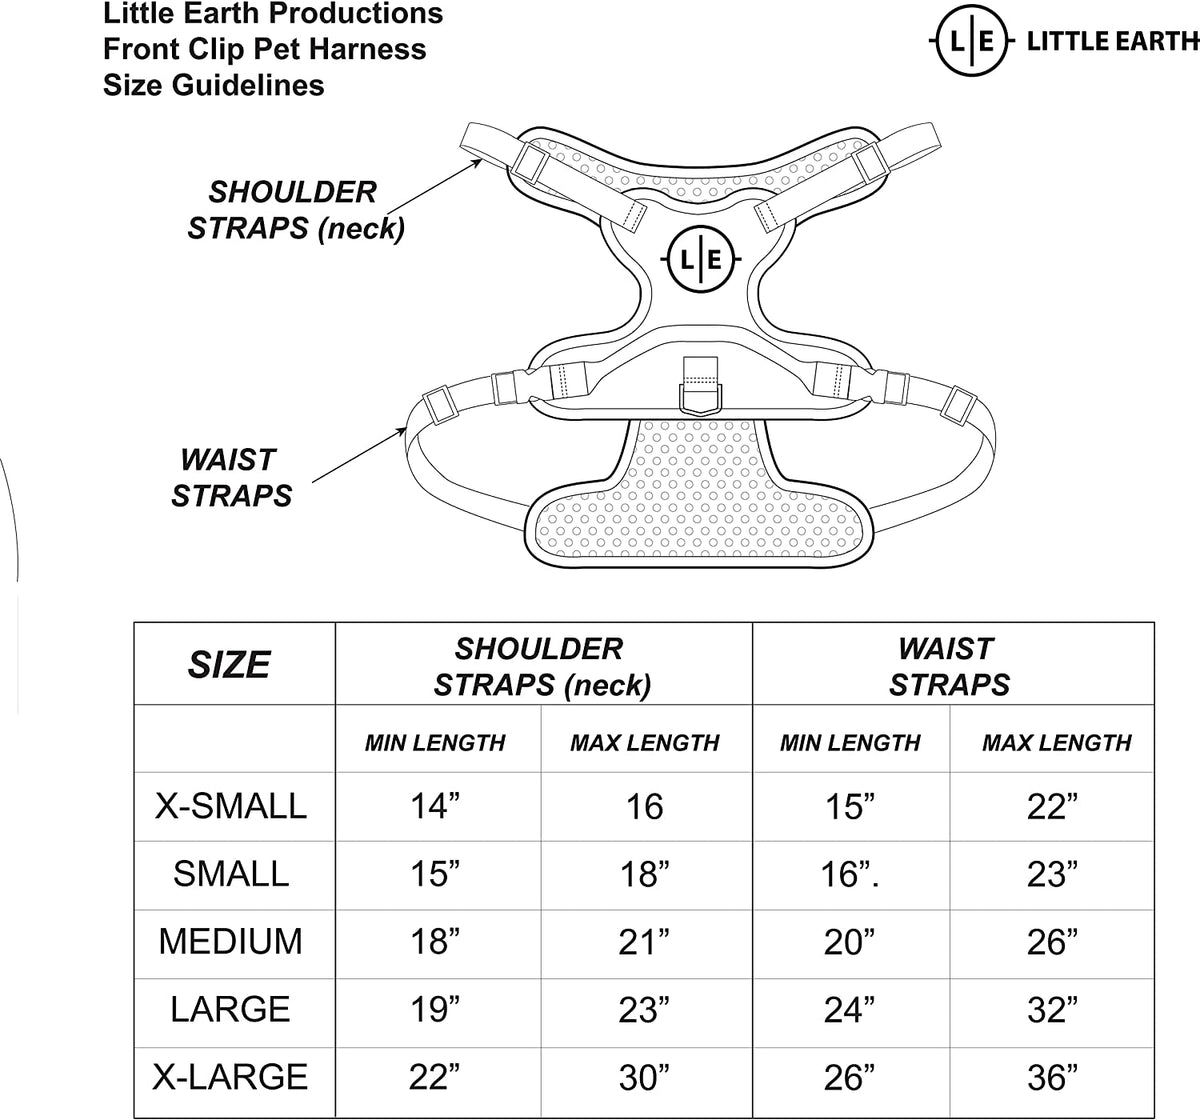 IA Hawkeyes Front Clip Harness